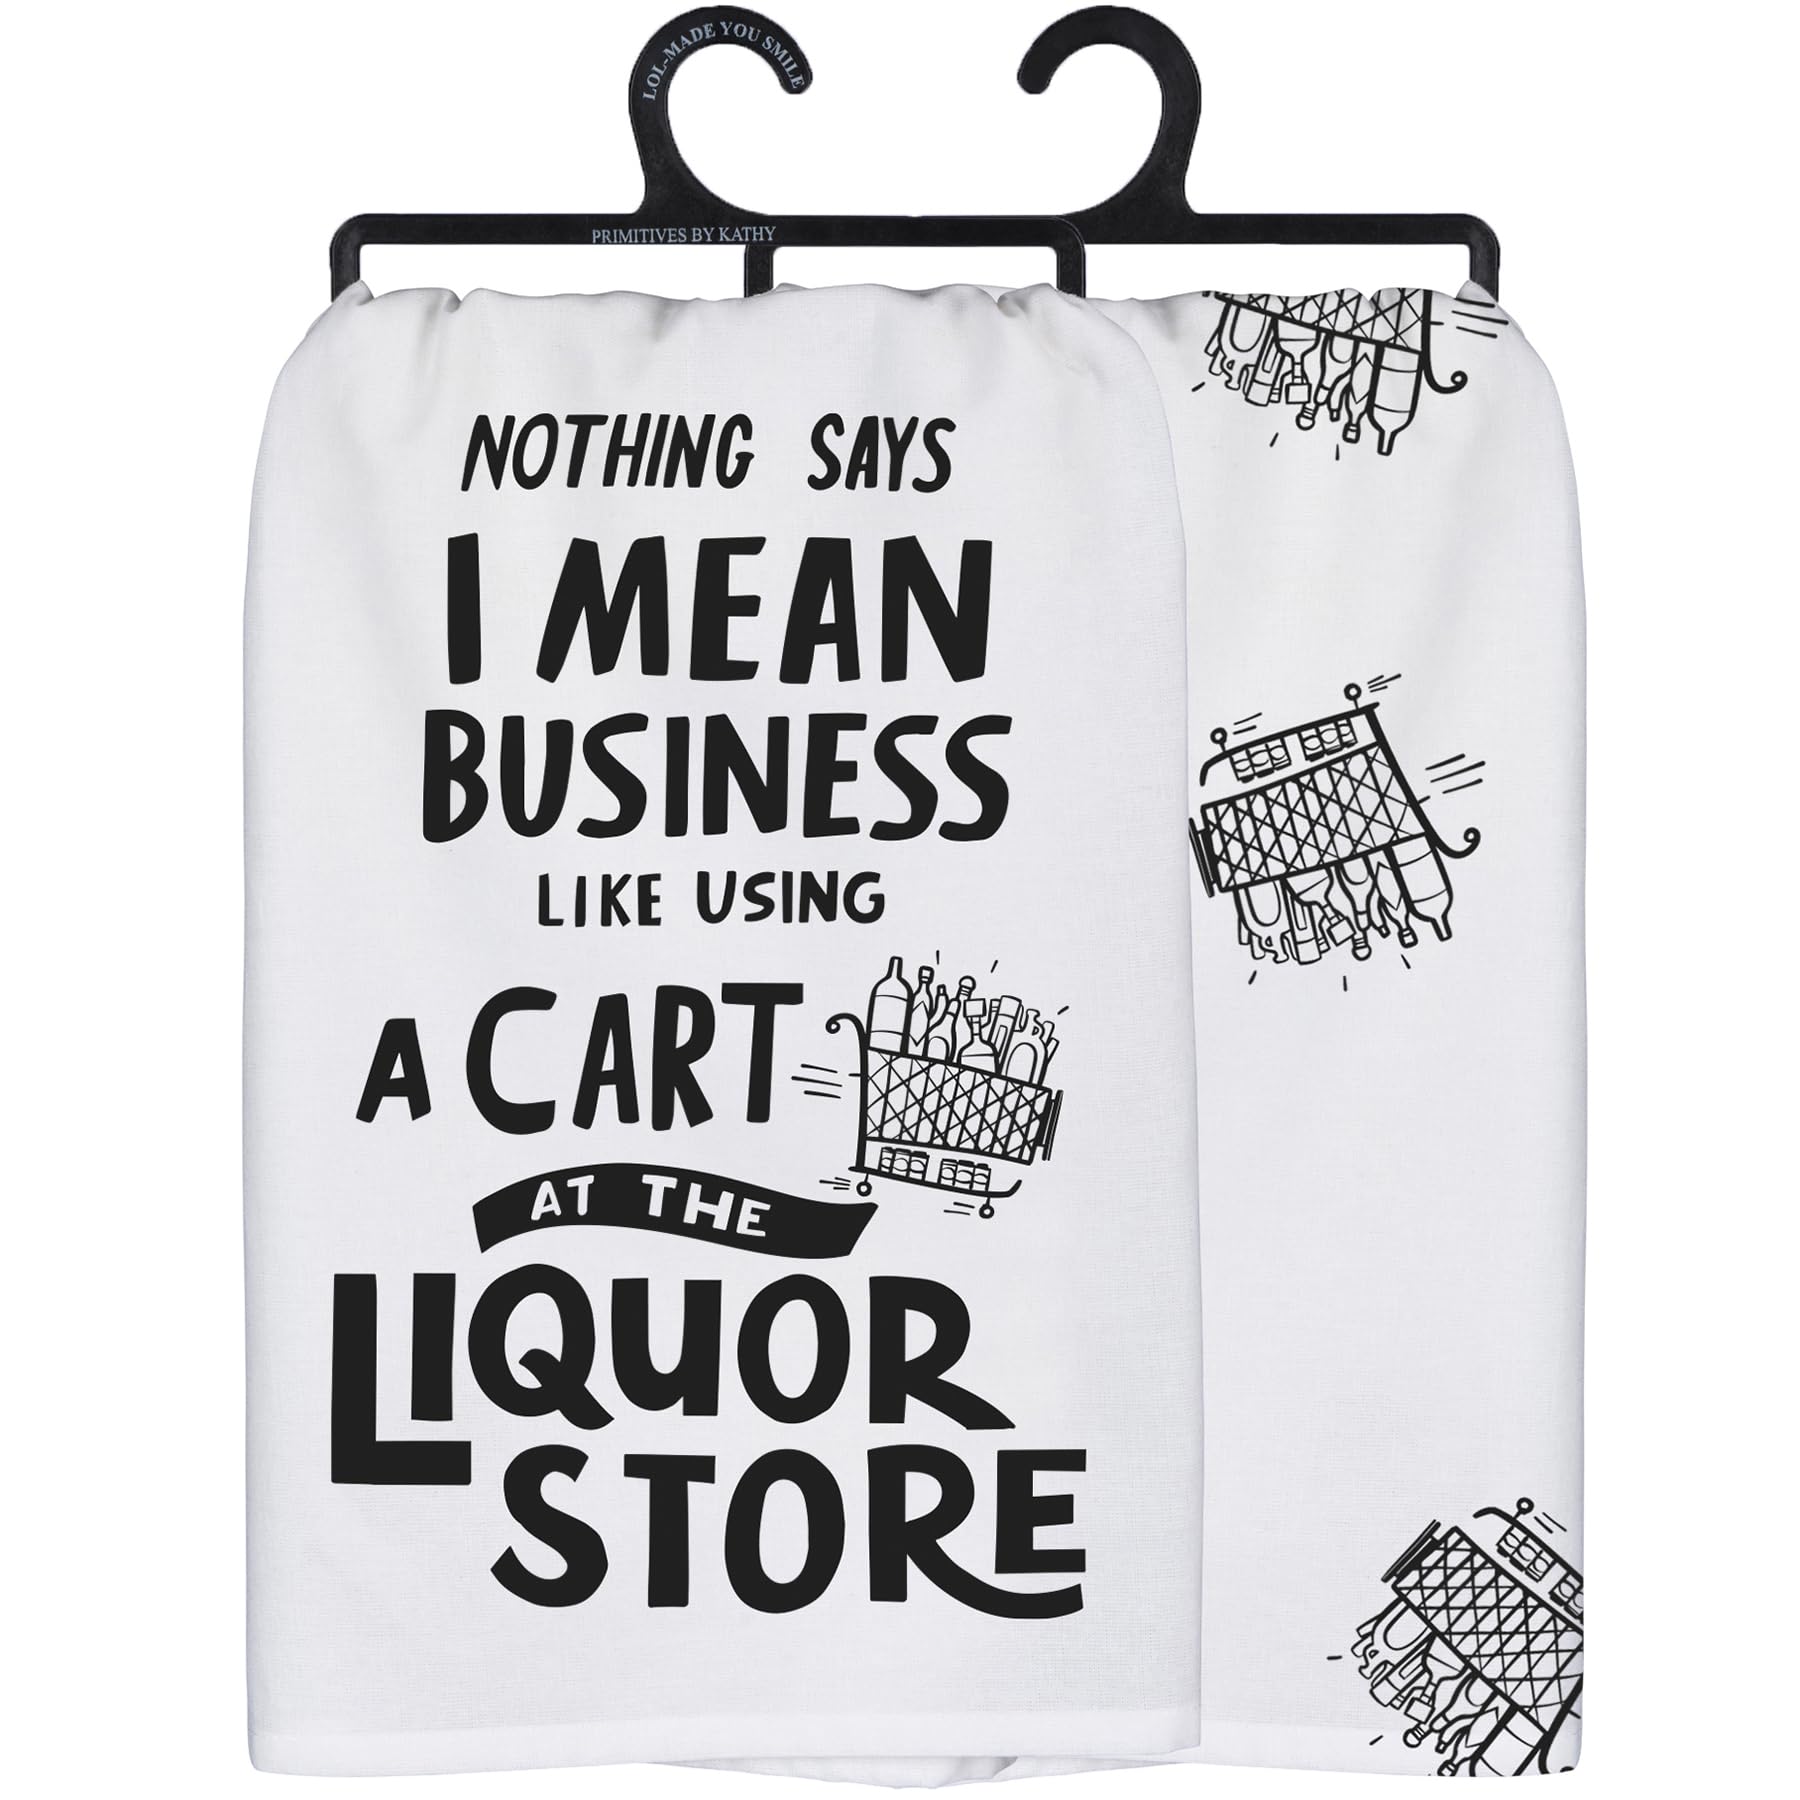 Primitives by Kathy Decorative Kitchen Towel- Nothing Says I Mean Business Like Using a Cart at Liquor Store